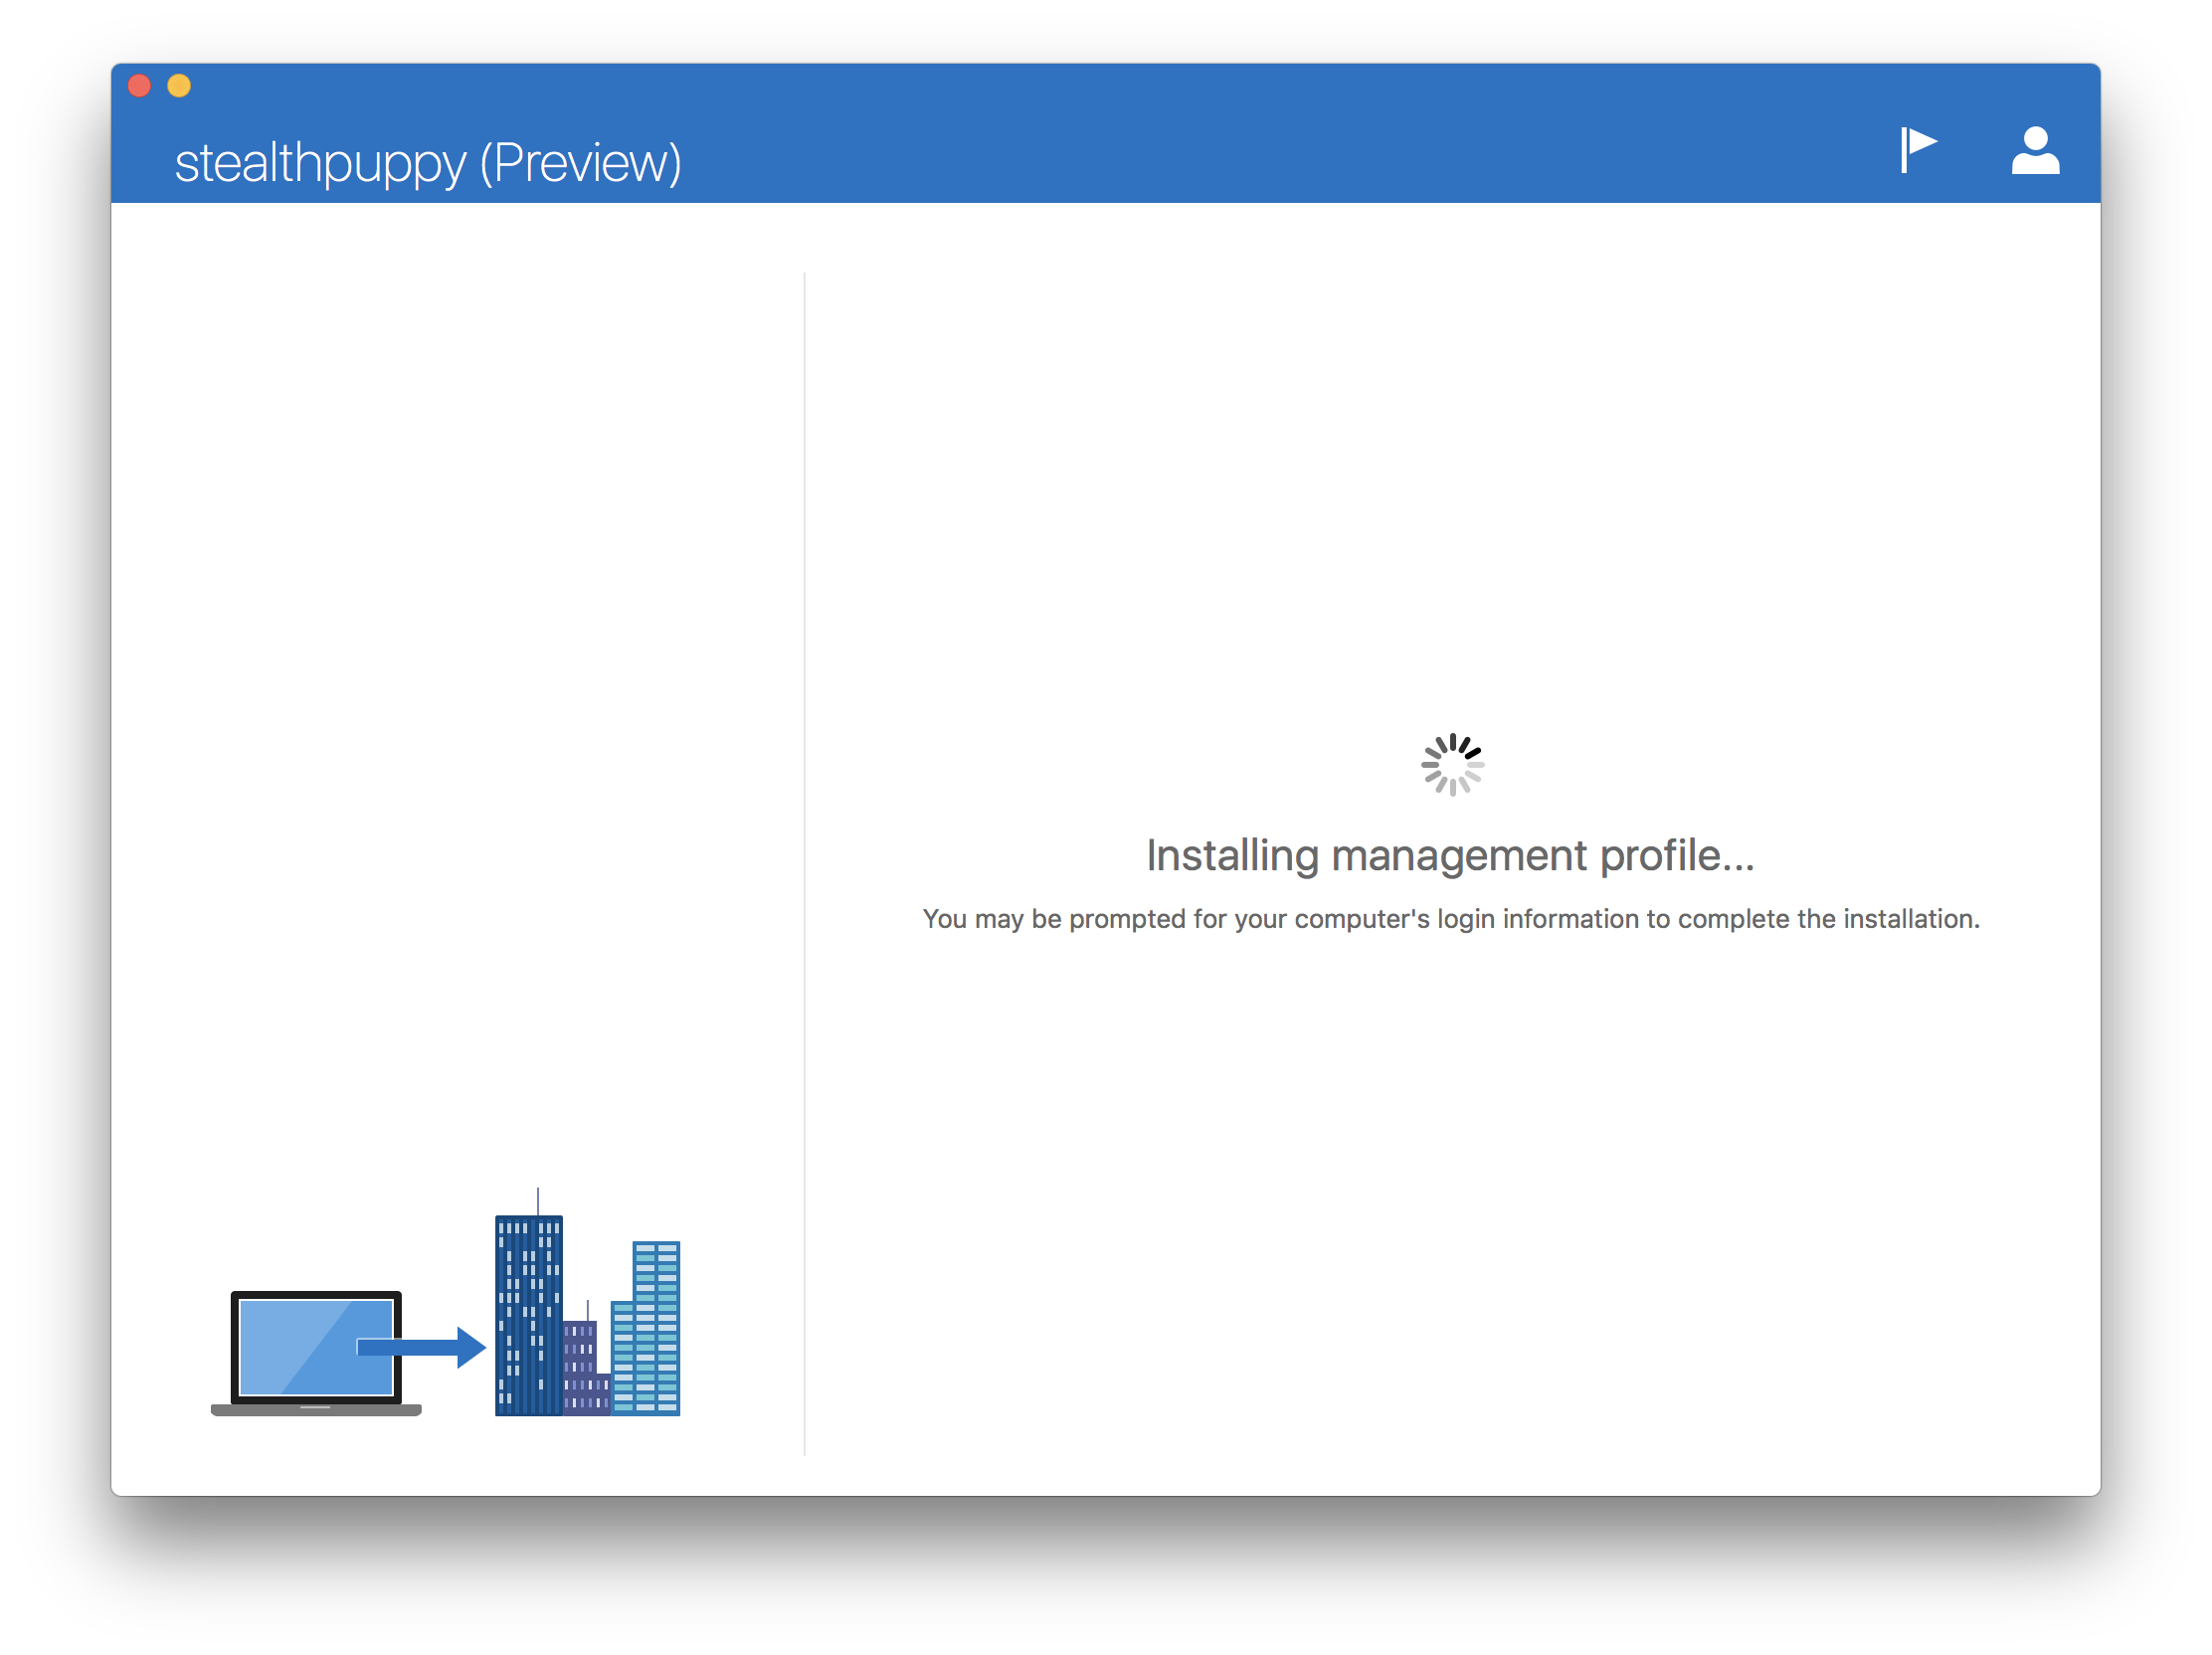 Installing the management profile